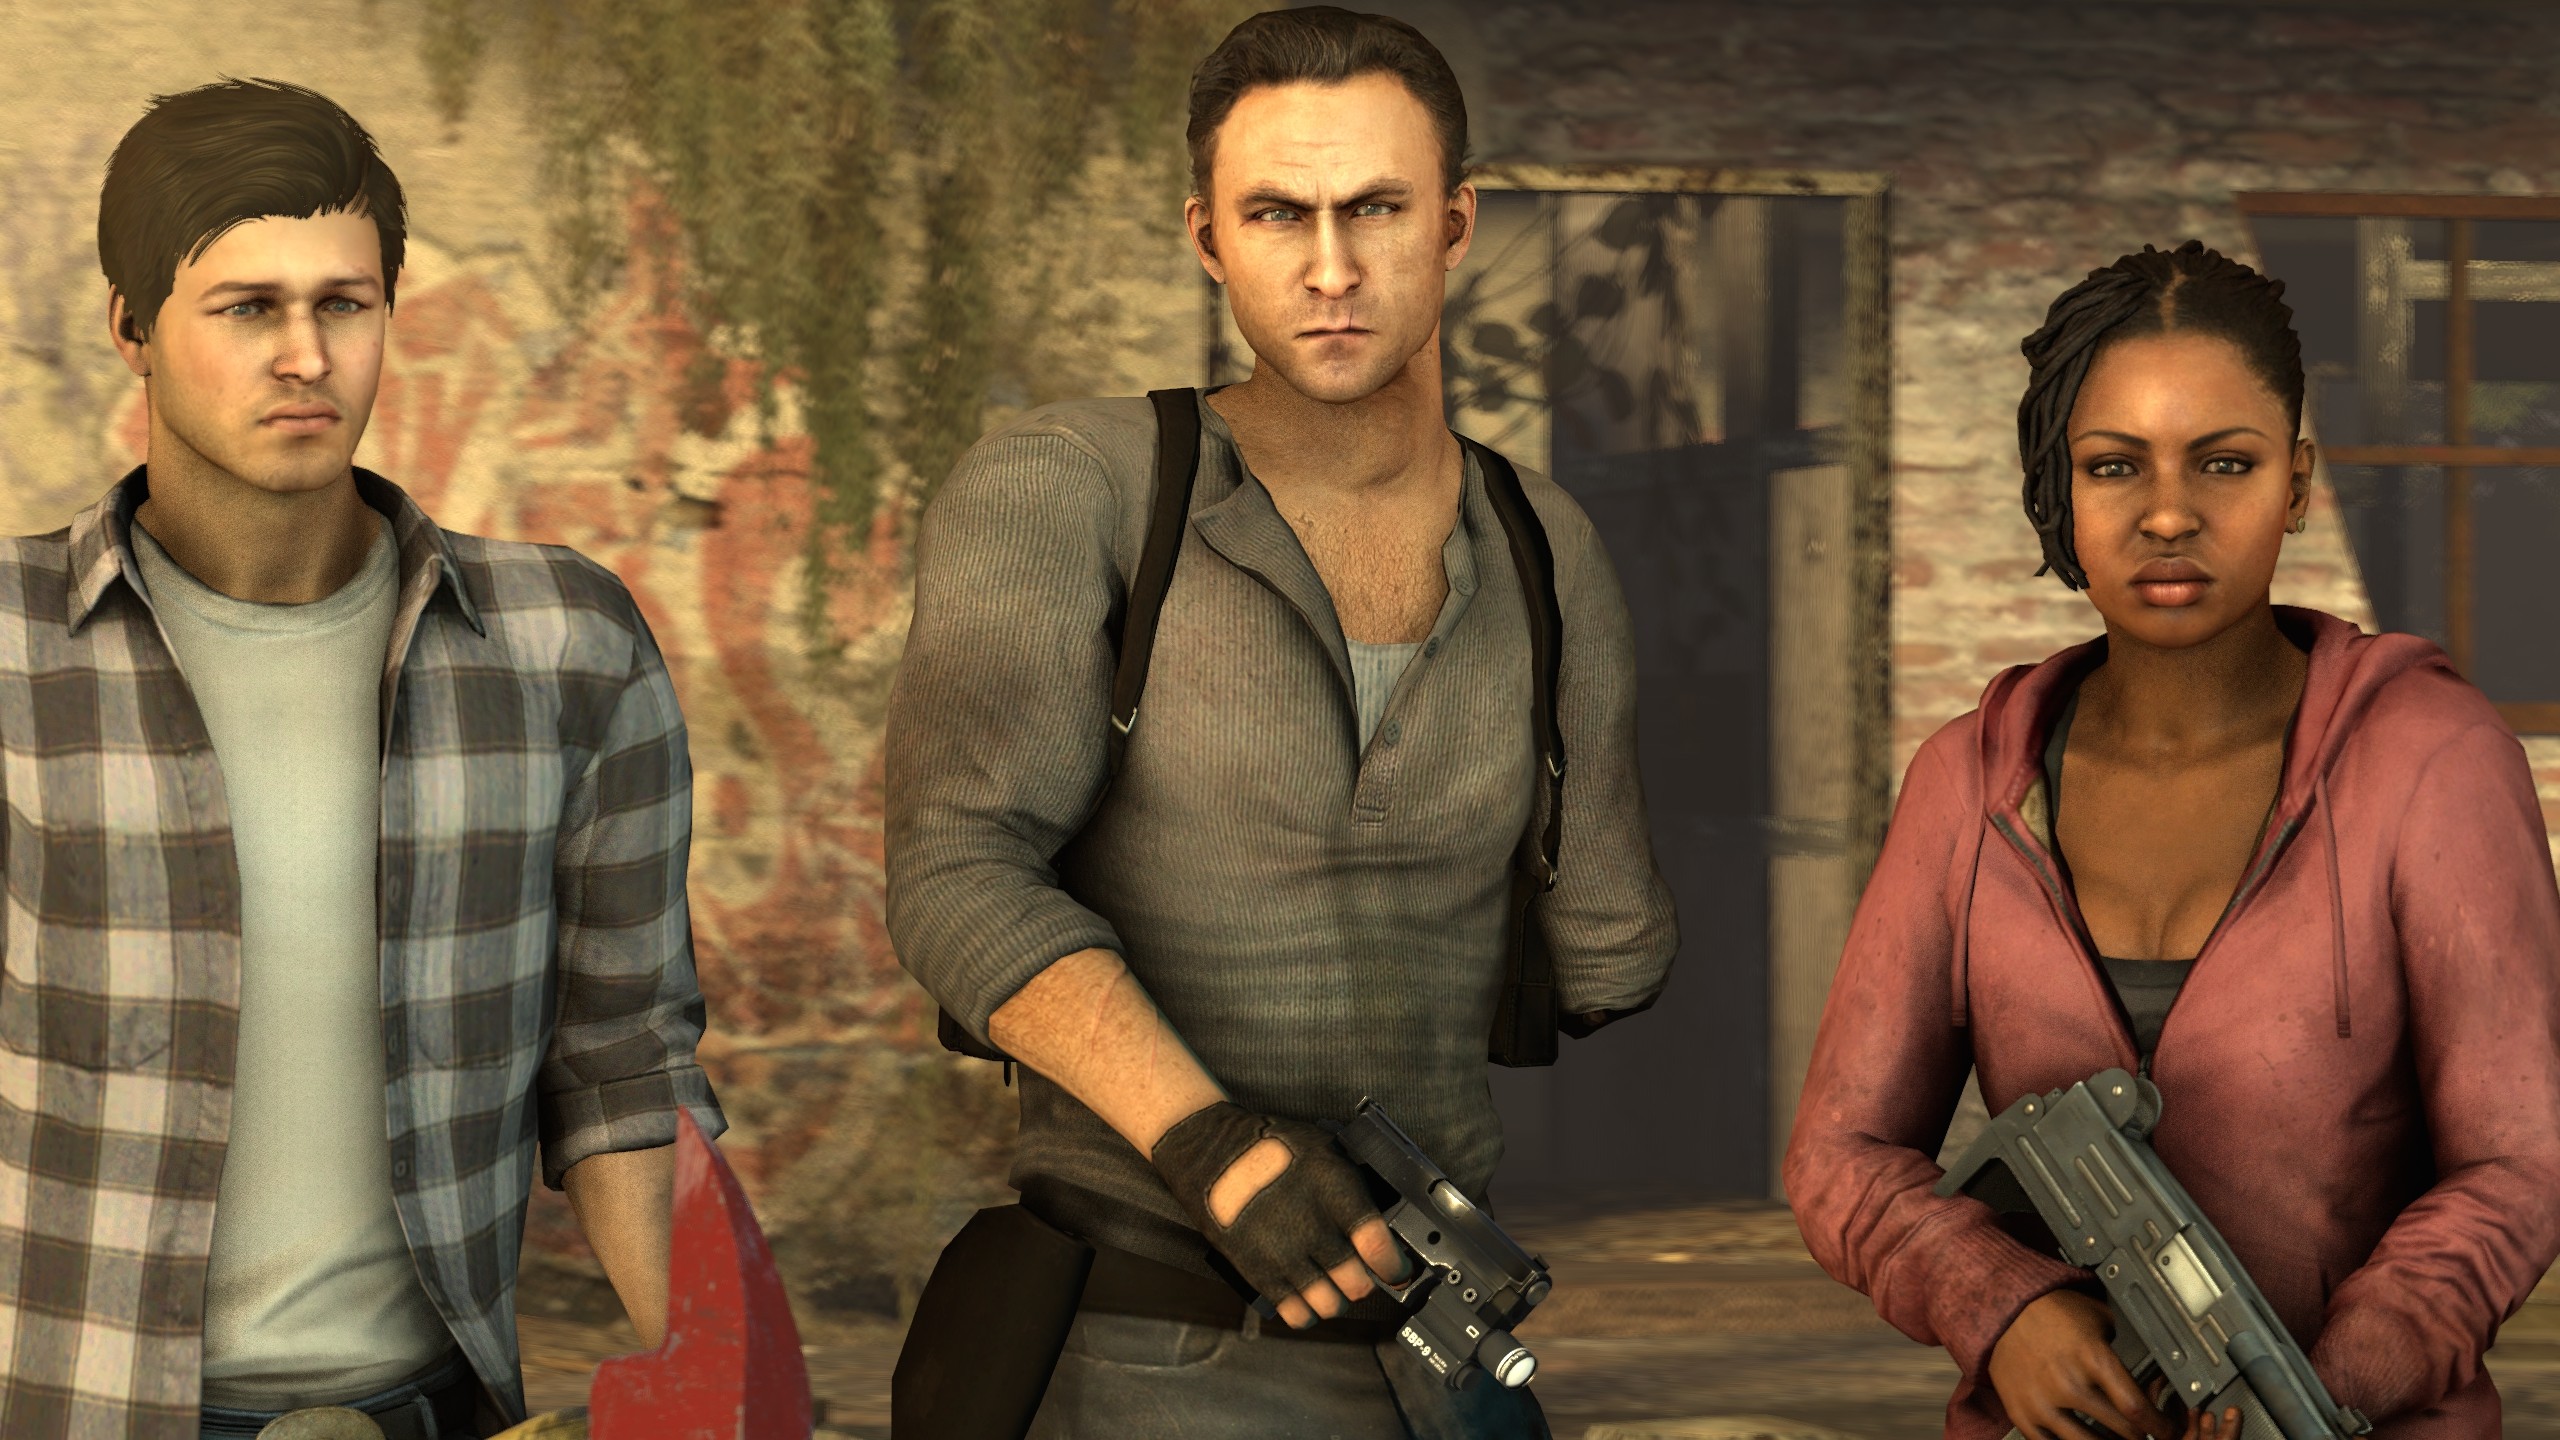 2560x1440 ... Left 4 Dead : The Survival Preview #1 by Shaun95